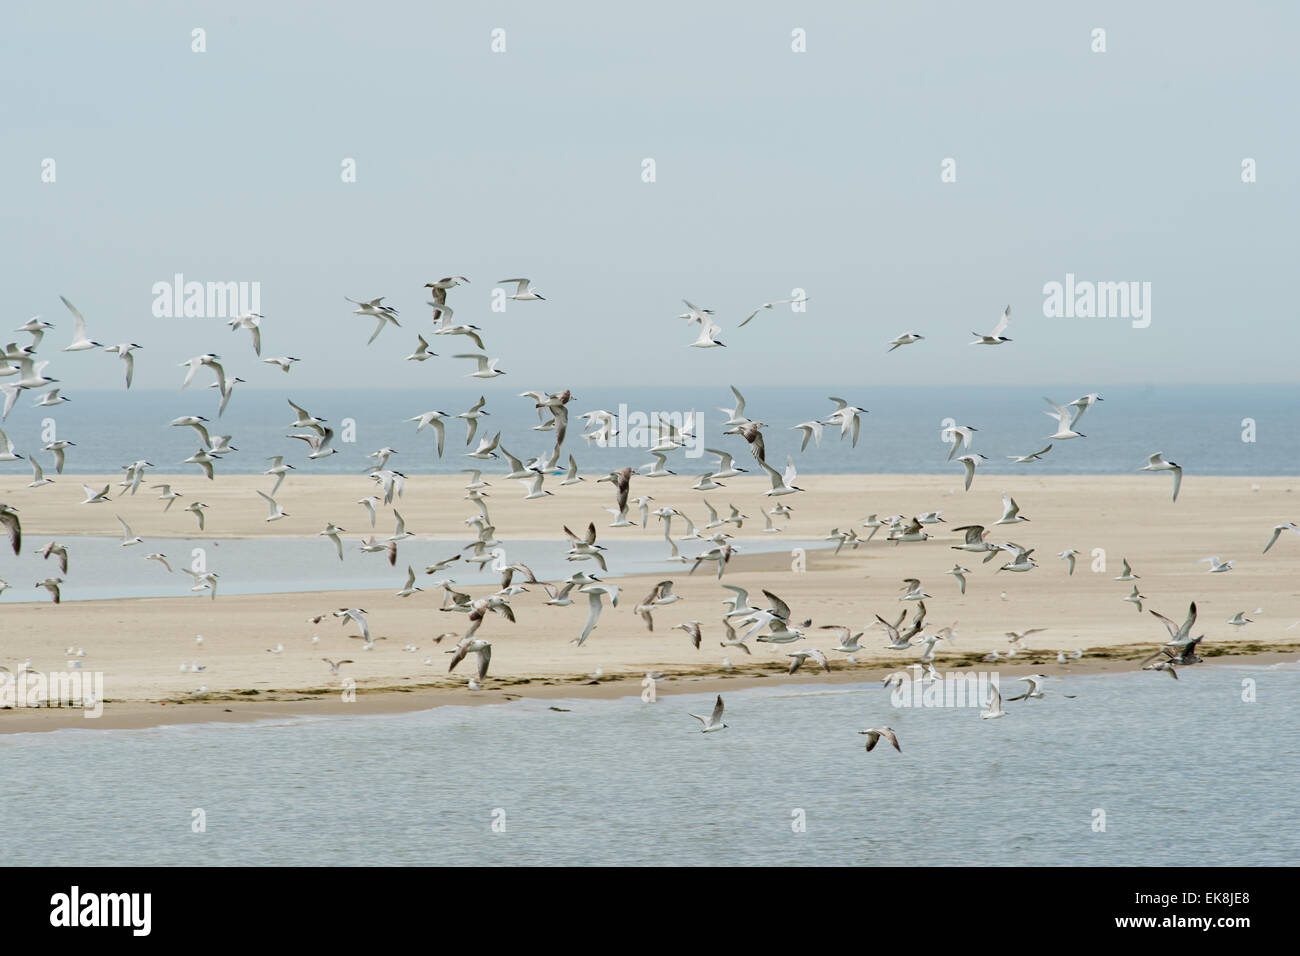 Many flying seagulls above the Dutch wadden sea Stock Photo